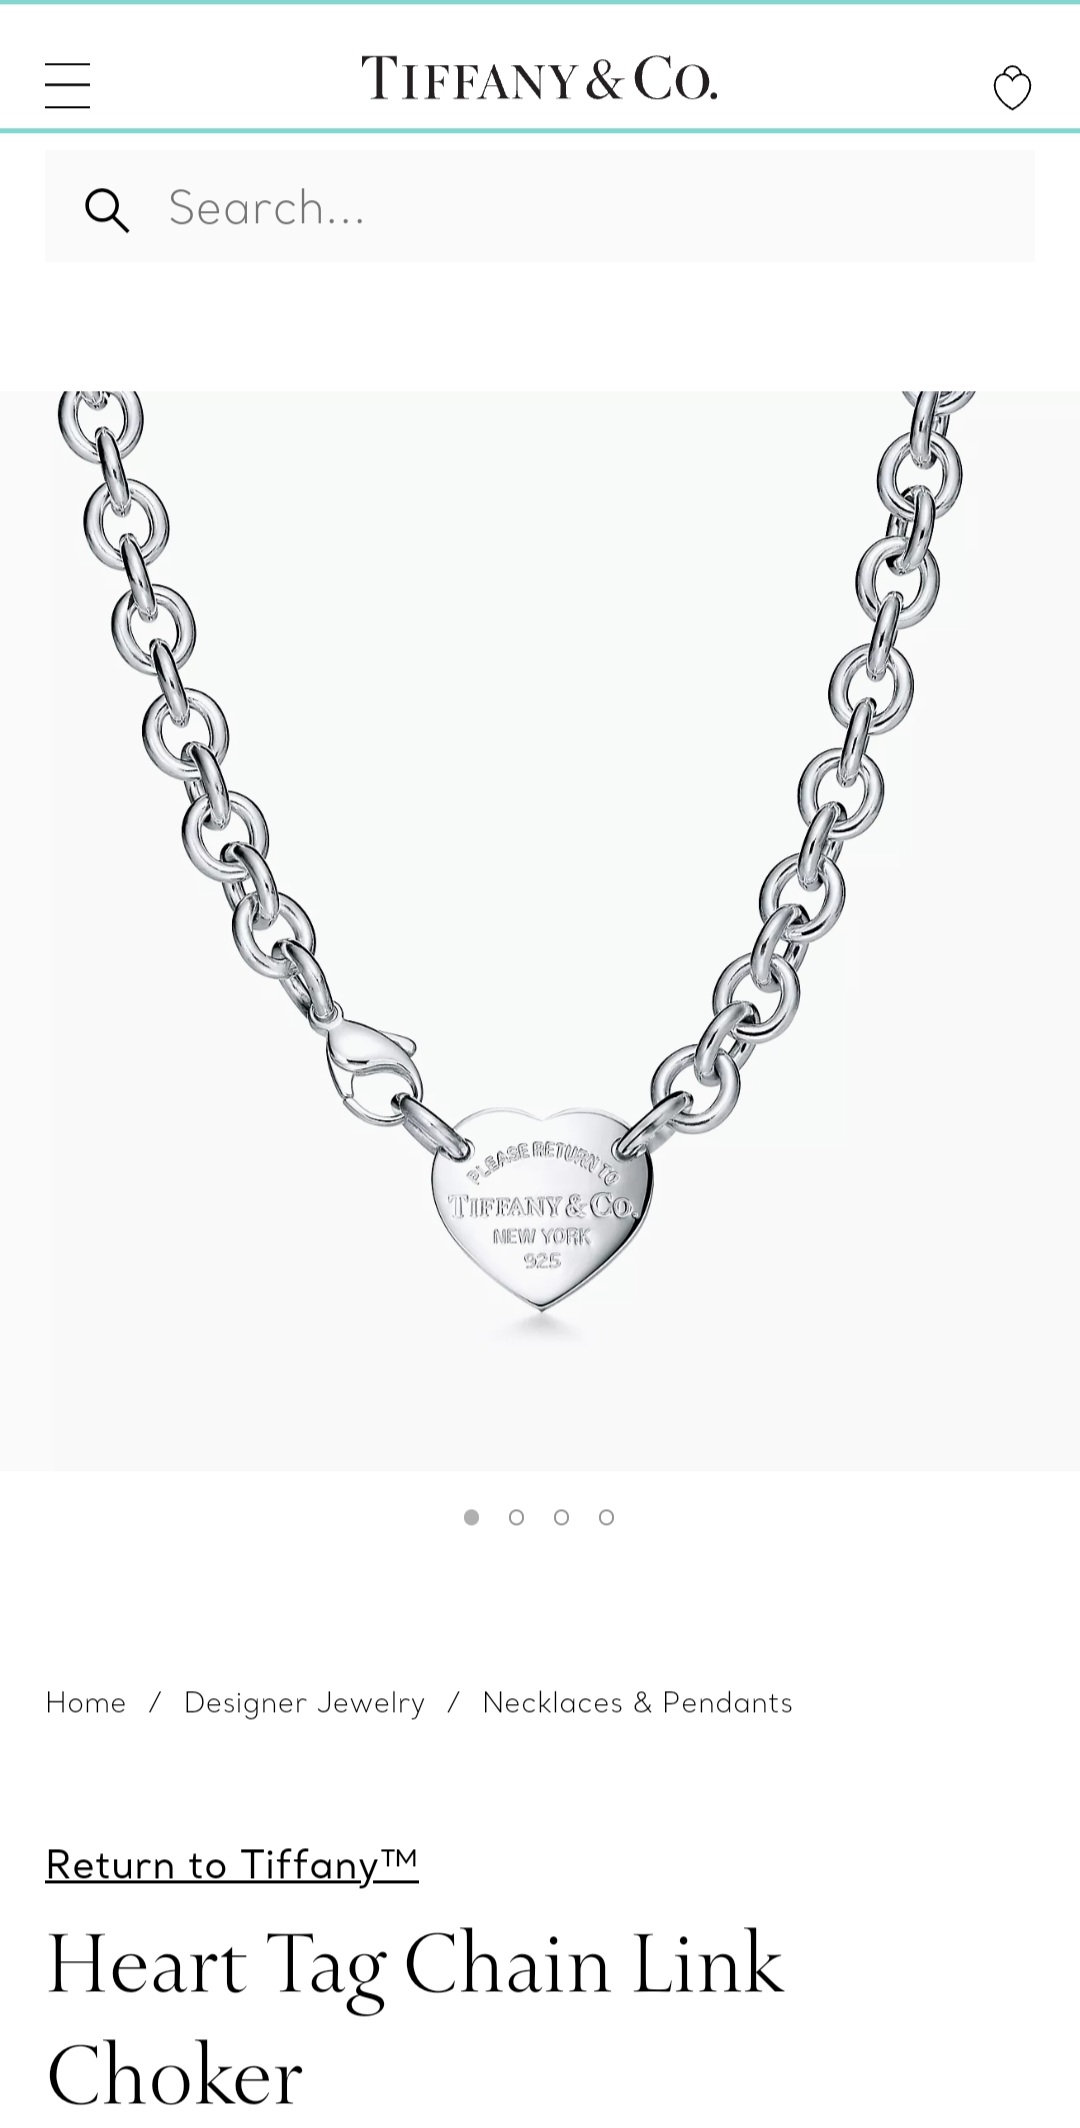 Return to Tiffany & co Heart Tag Chain Link Choker necklace